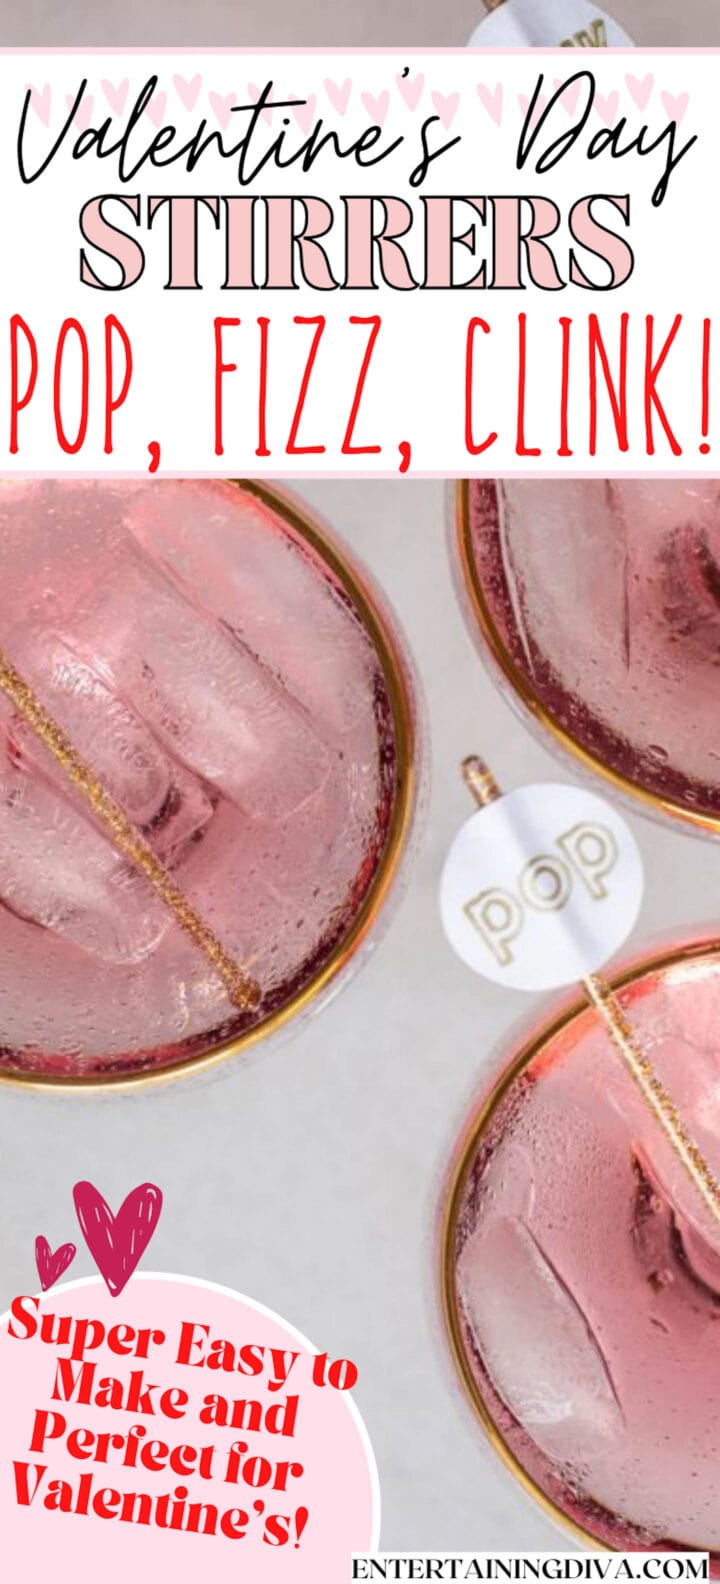 Pop Fizz Clink Champagne Stirrers (with Free Printable)